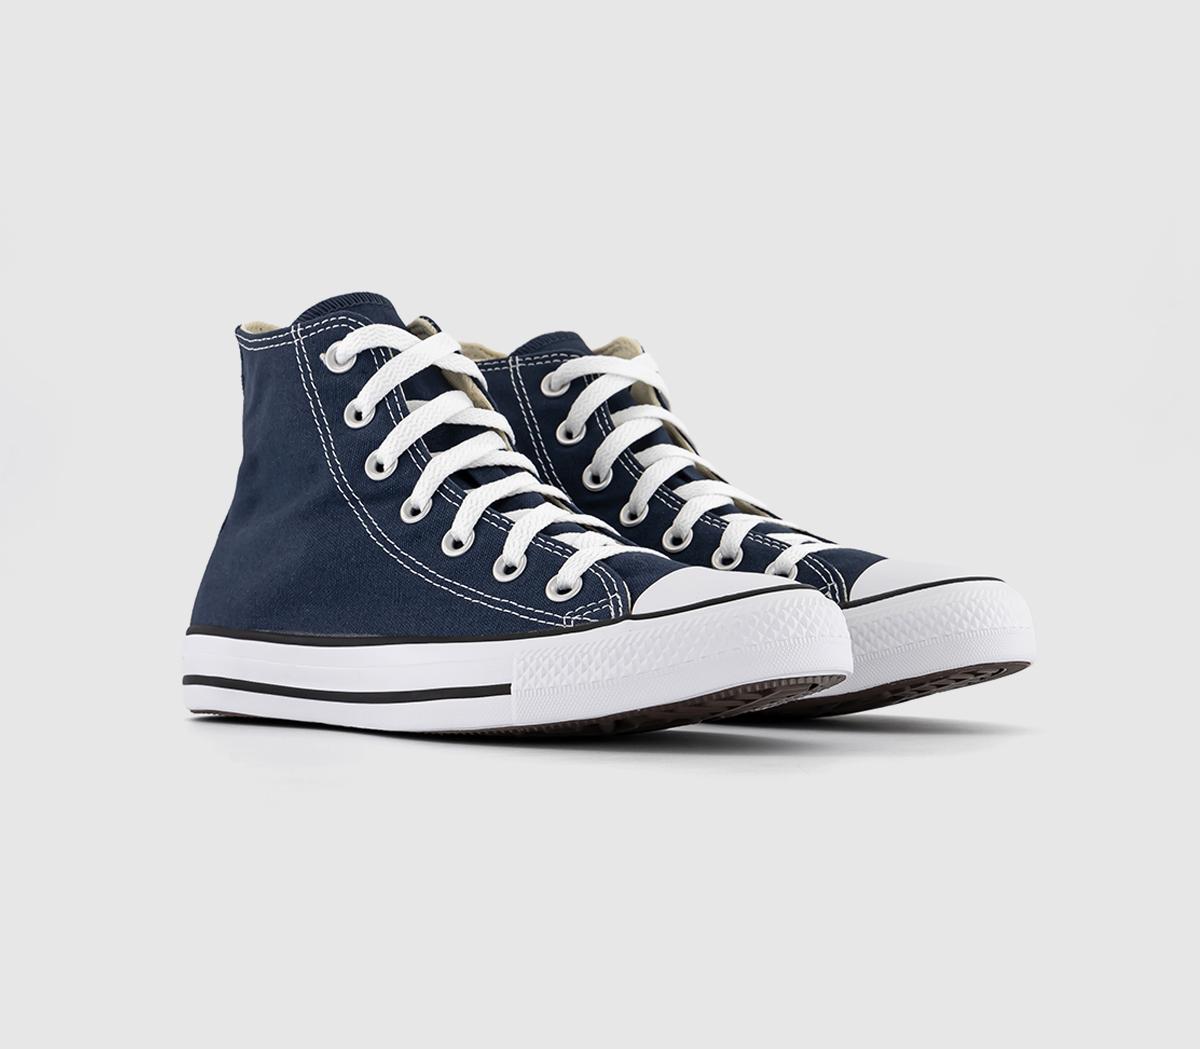 Mens Converse All Star Hi Canvas Trainers In Navy Blue And White, 6